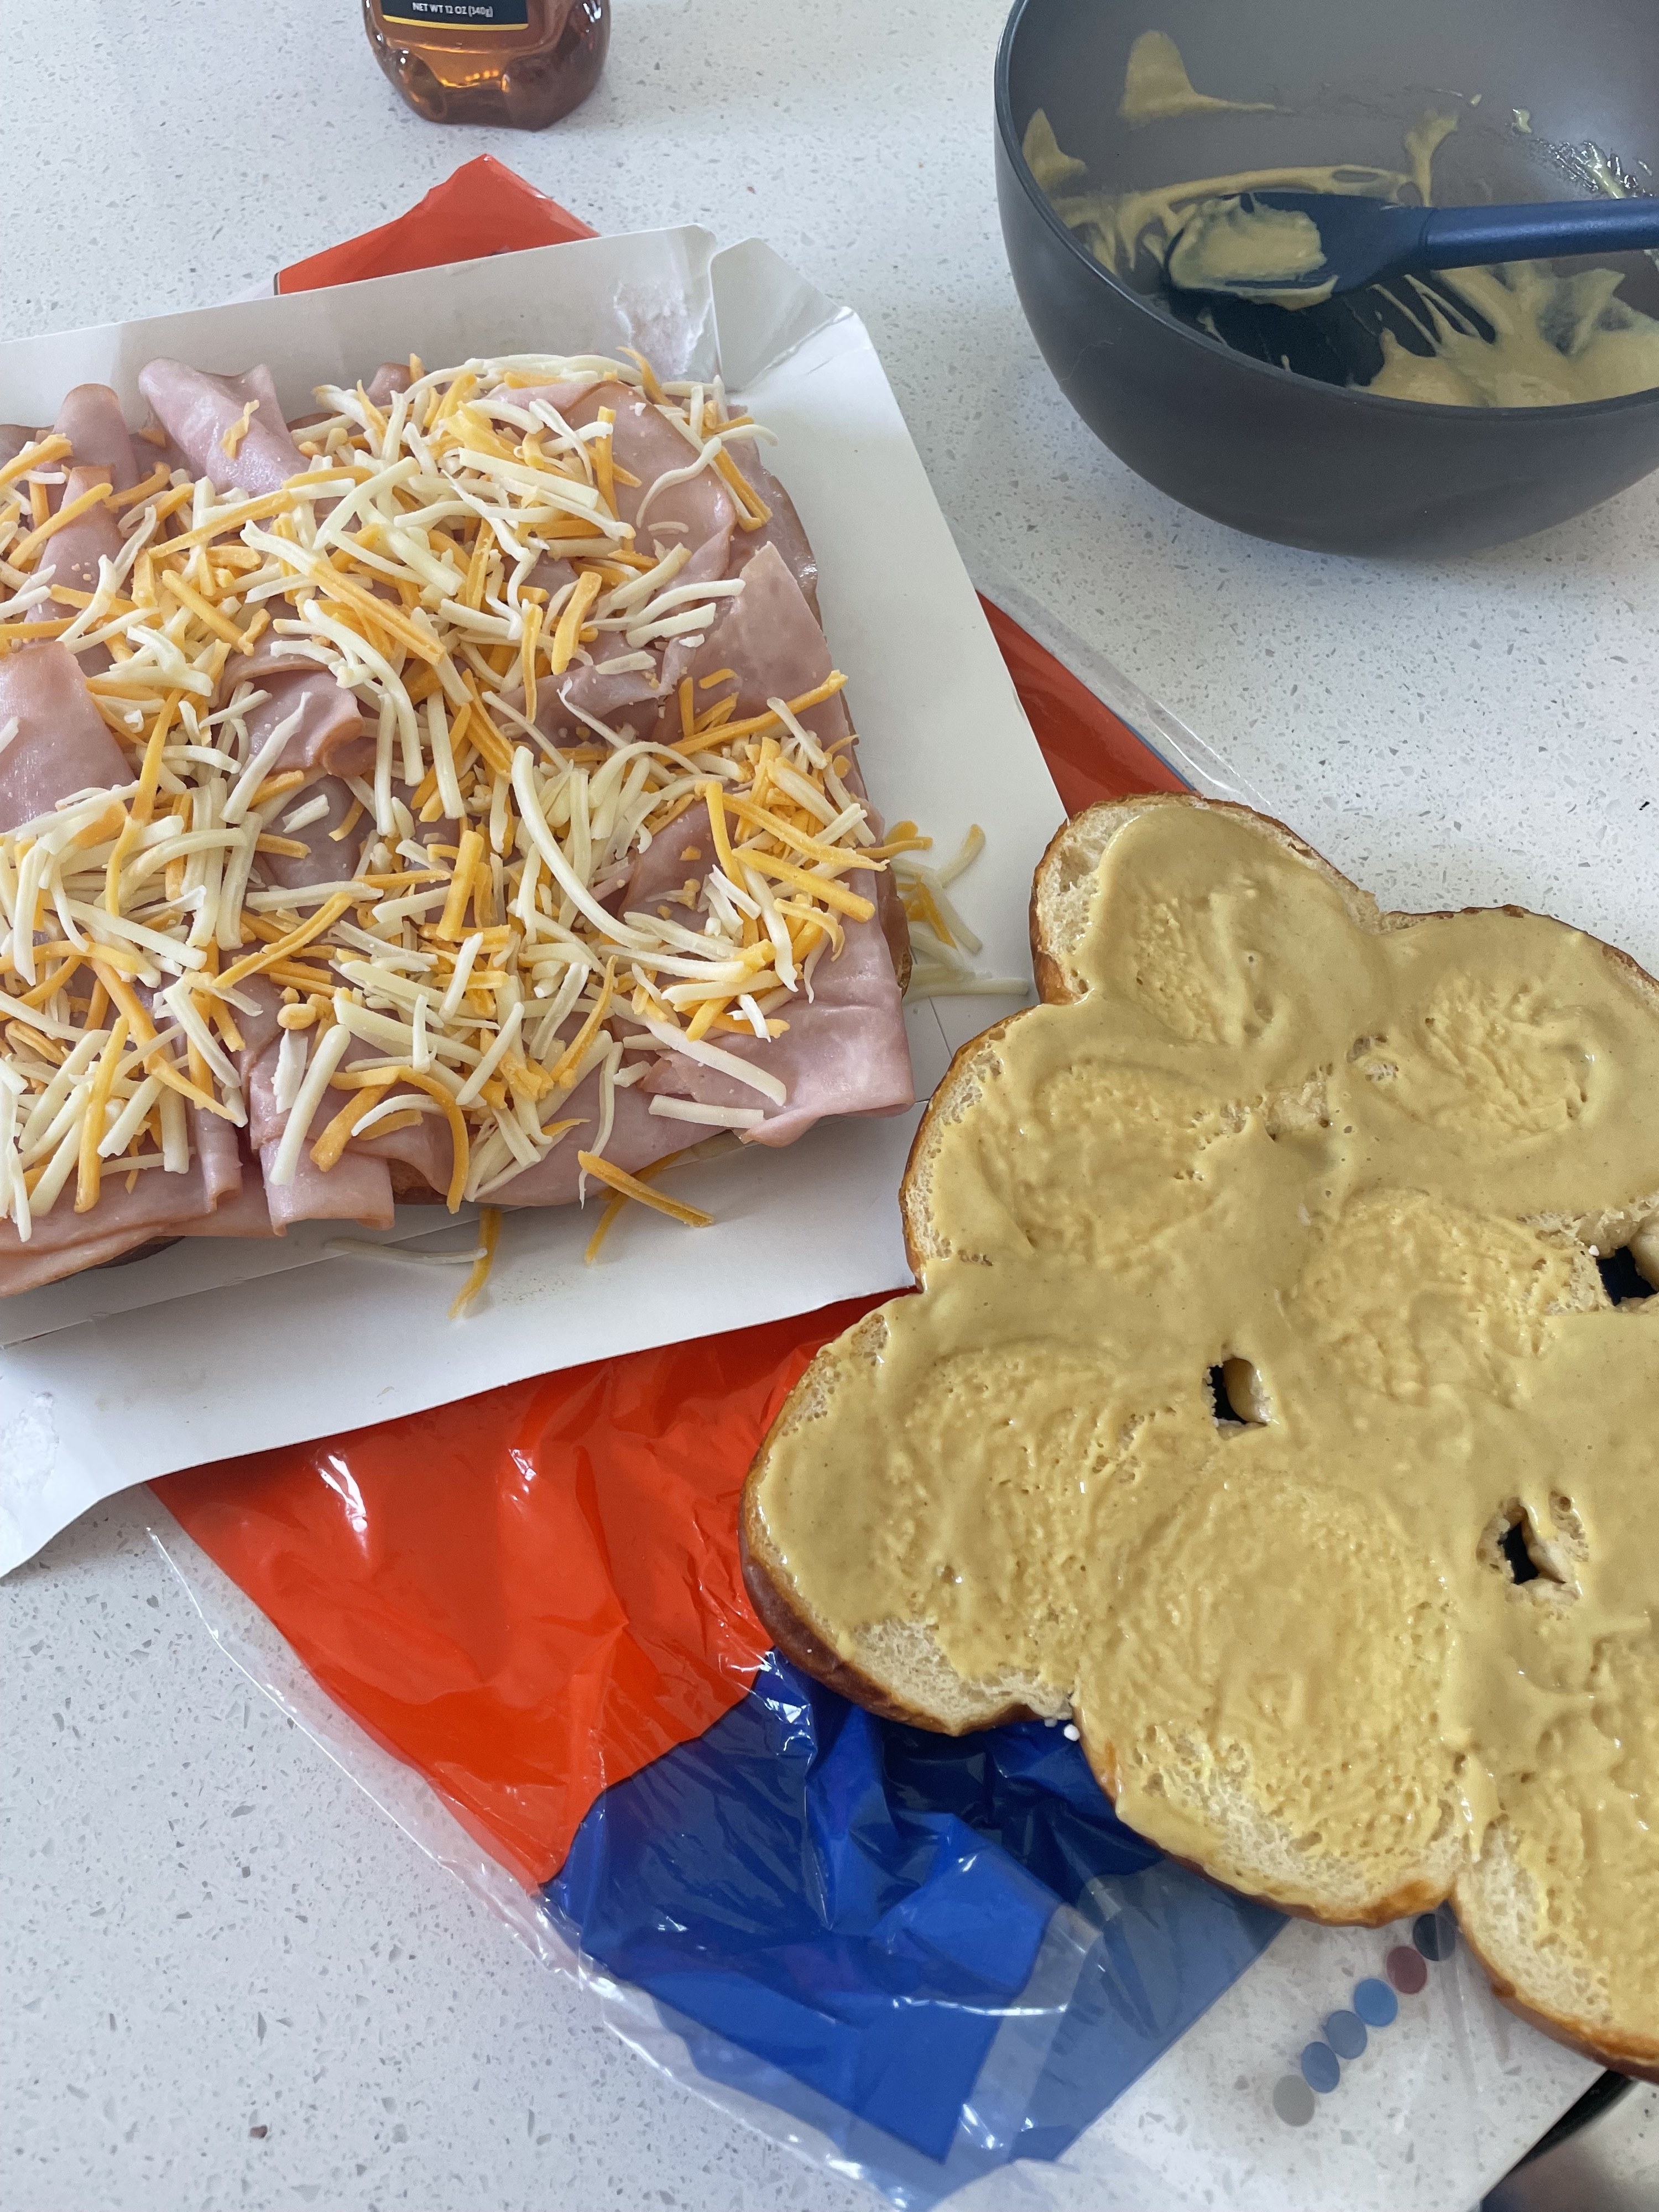 Assembling the ham and cheese sliders